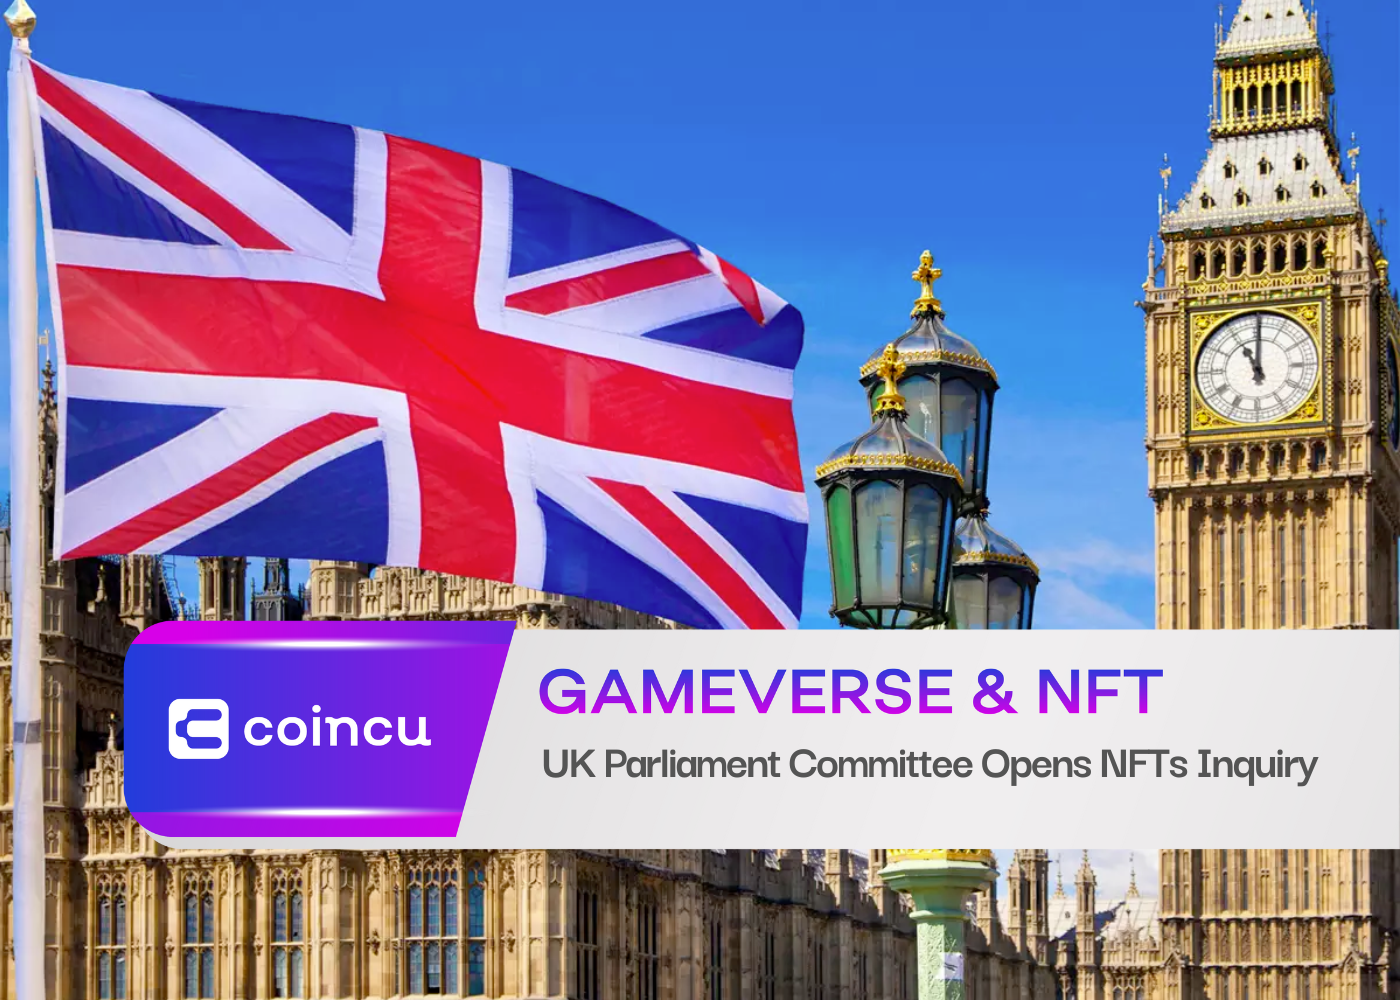 UK Parliament Committee Opens NFTs Inquiry